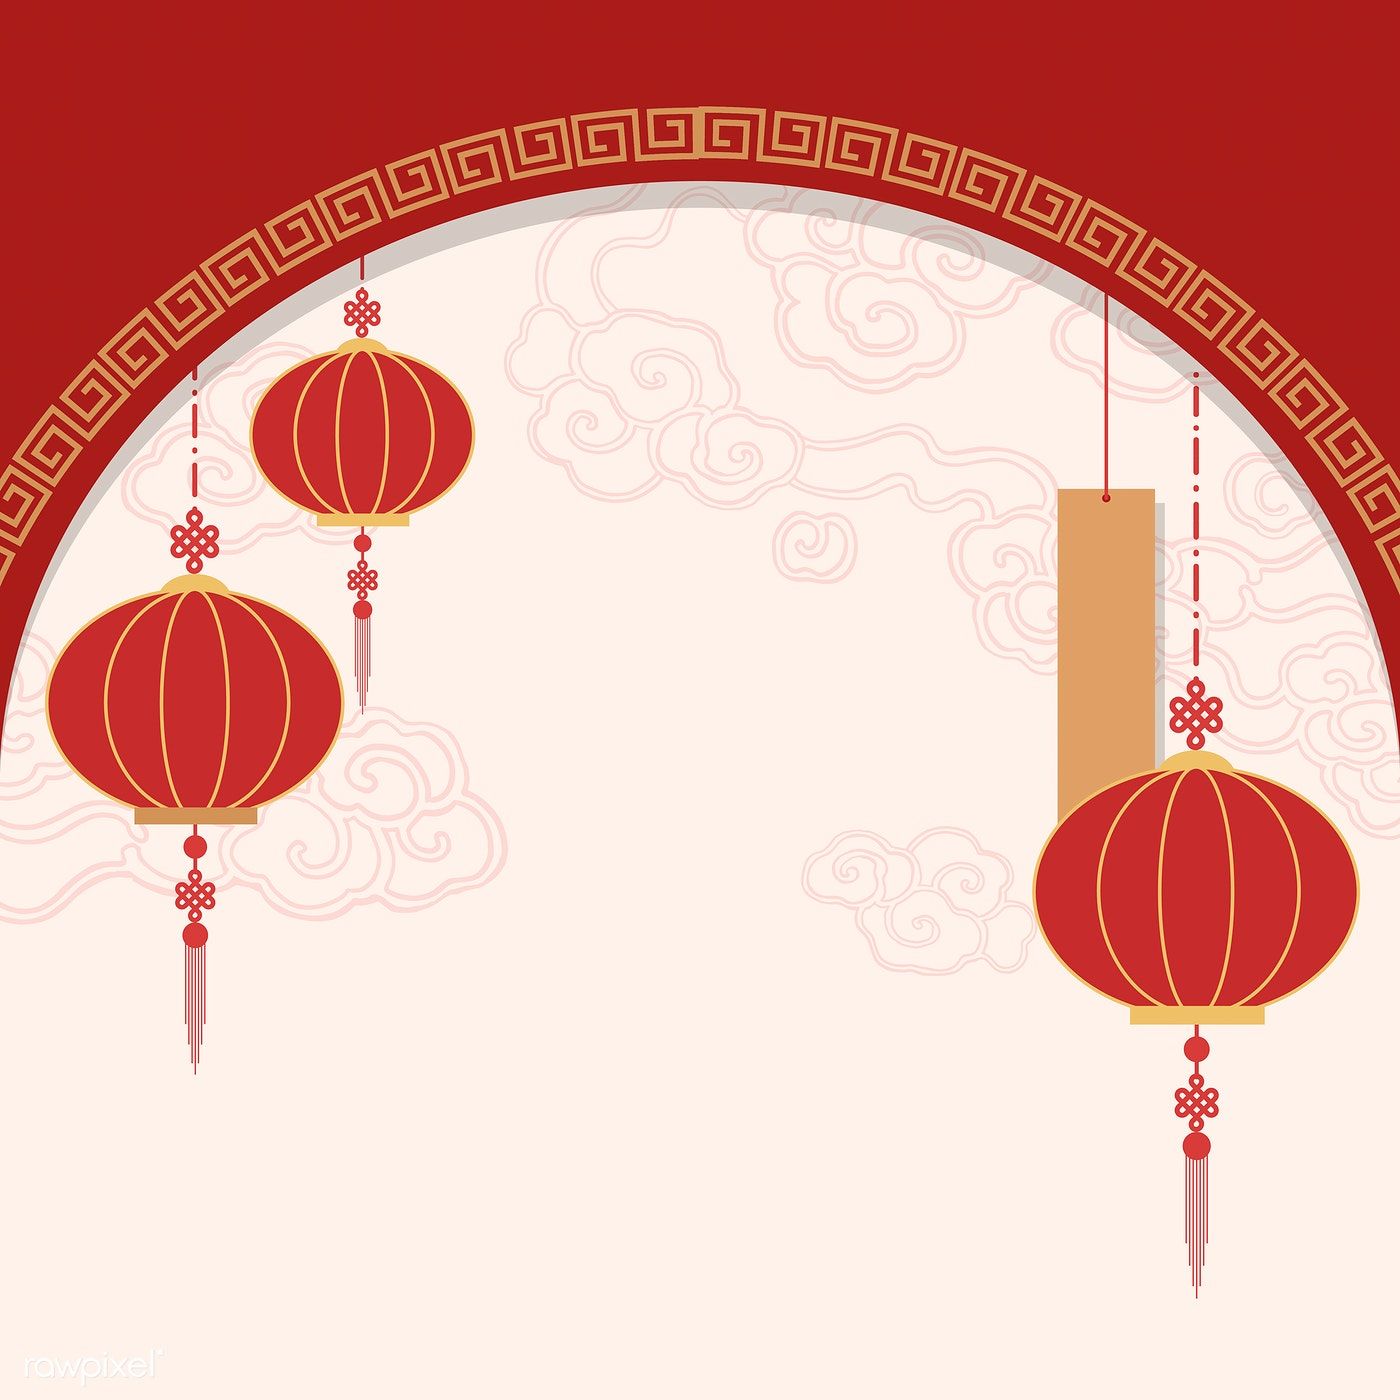 Download premium vector of Chinese new year 2019 greeting background 555247. Chinese new year background, Chinese background, Chinese new year poster